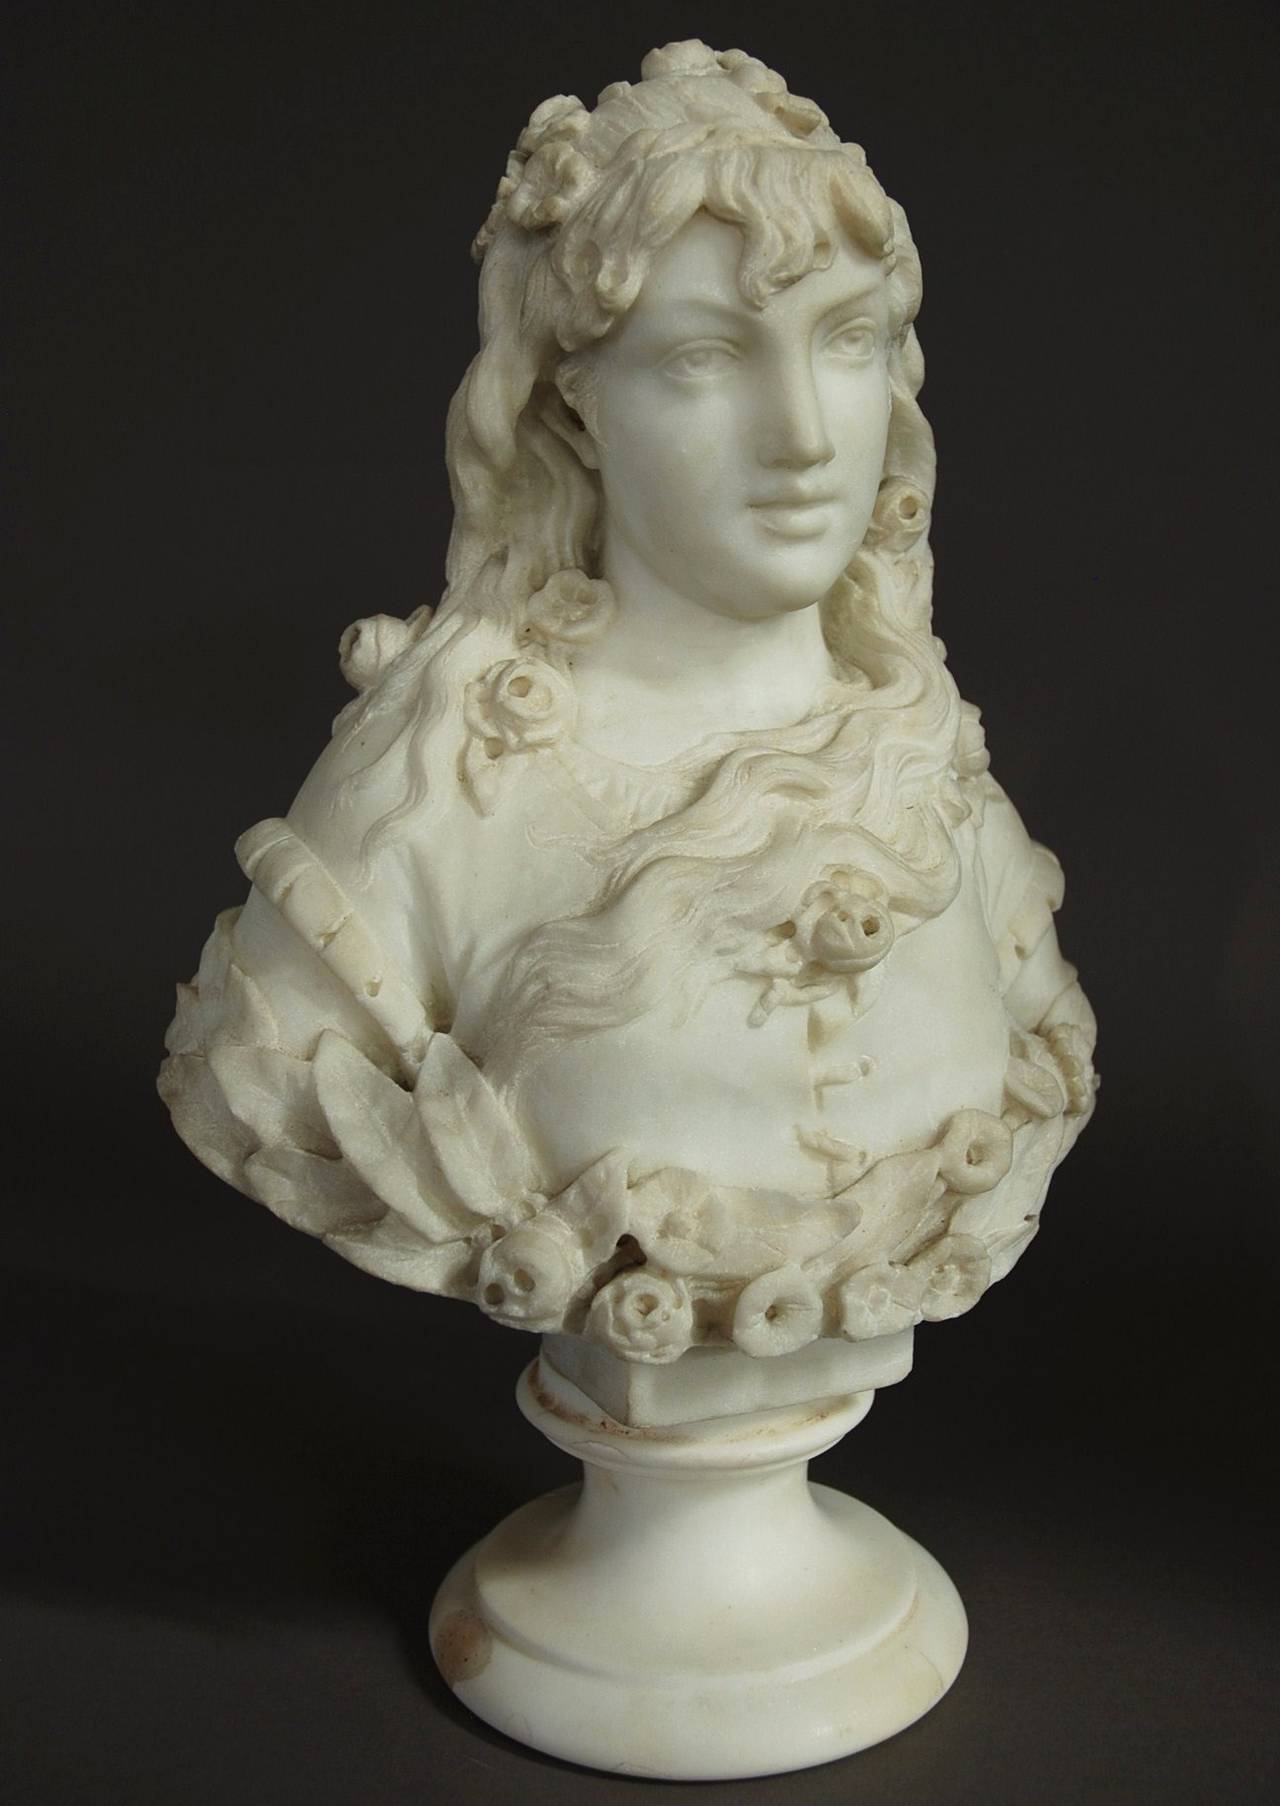 A late 19th century finely carved marble bust of a young lady, carved from white carrara marble, possibly Italian.

This piece is nicely carved sculpture of a fresh faced young lady with long hair with roses both in her hair and clothing.

The